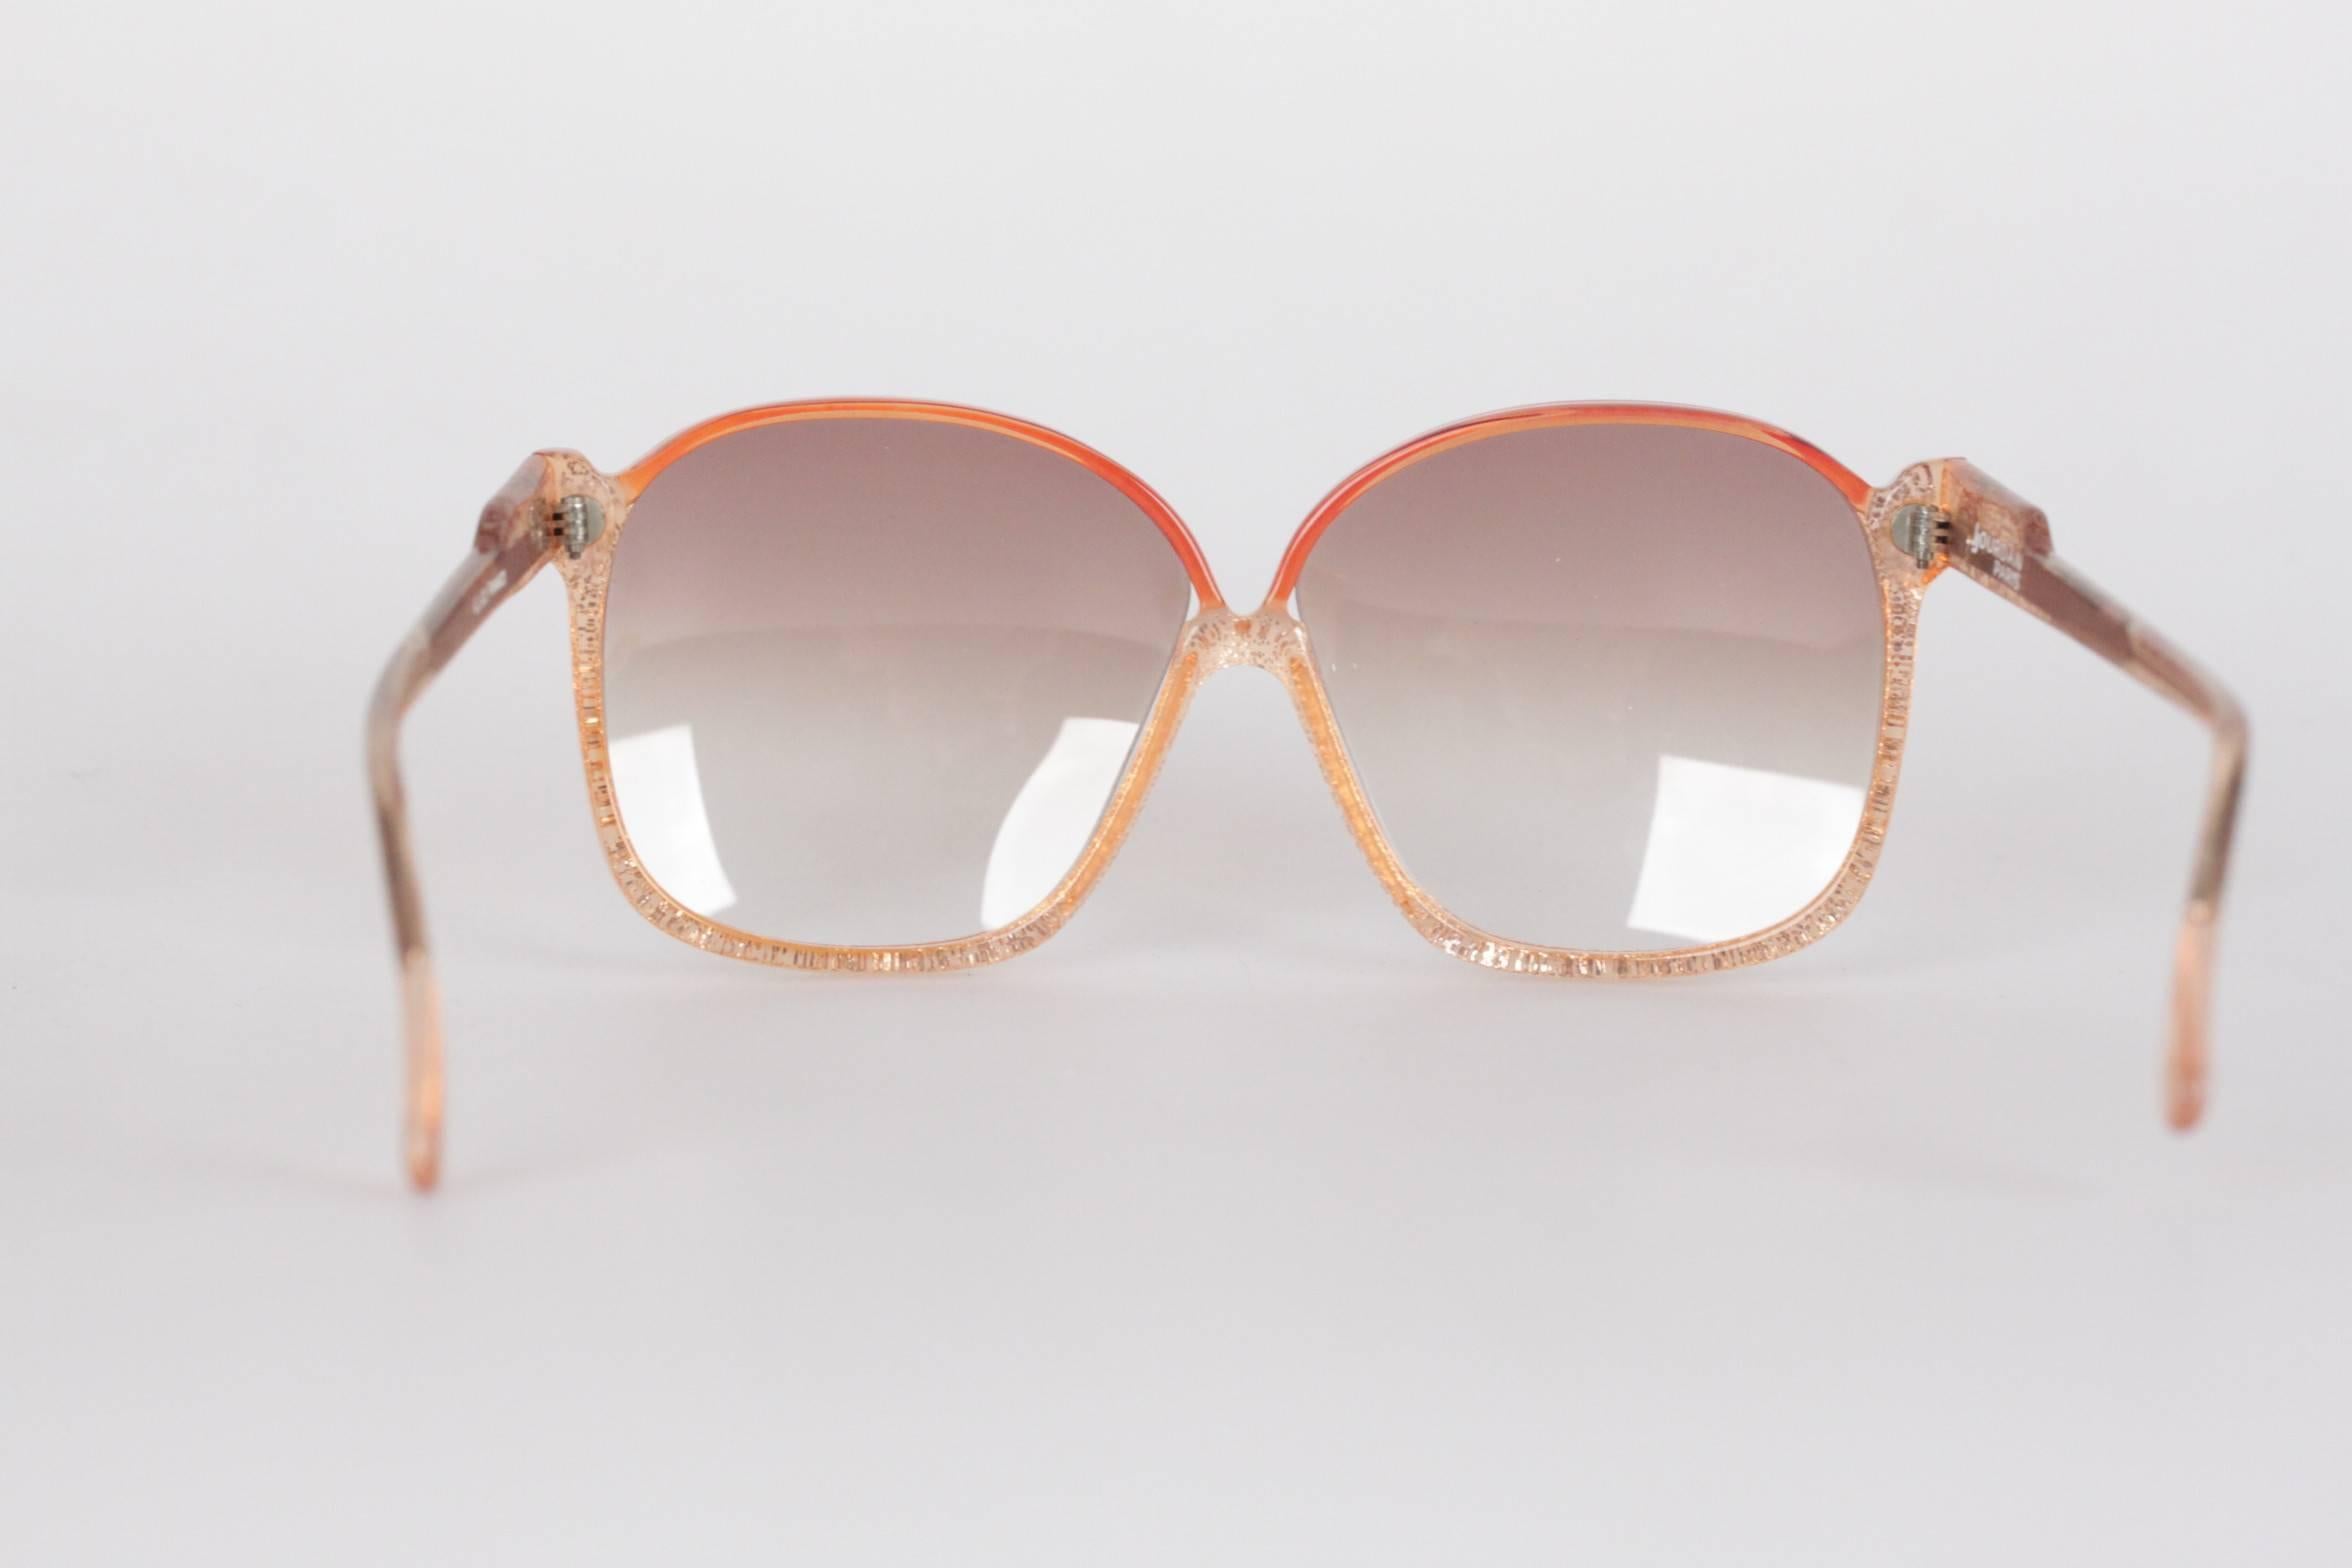 J JOURDAN vintage sunglasses, Made in France in the late '70s

Model reference: US3 - 196
Glitter effect on the inside of the oversized semi-transparent red/orange frame, with the top part which is darker.

Light brown GRADIENT MINT 100% UV